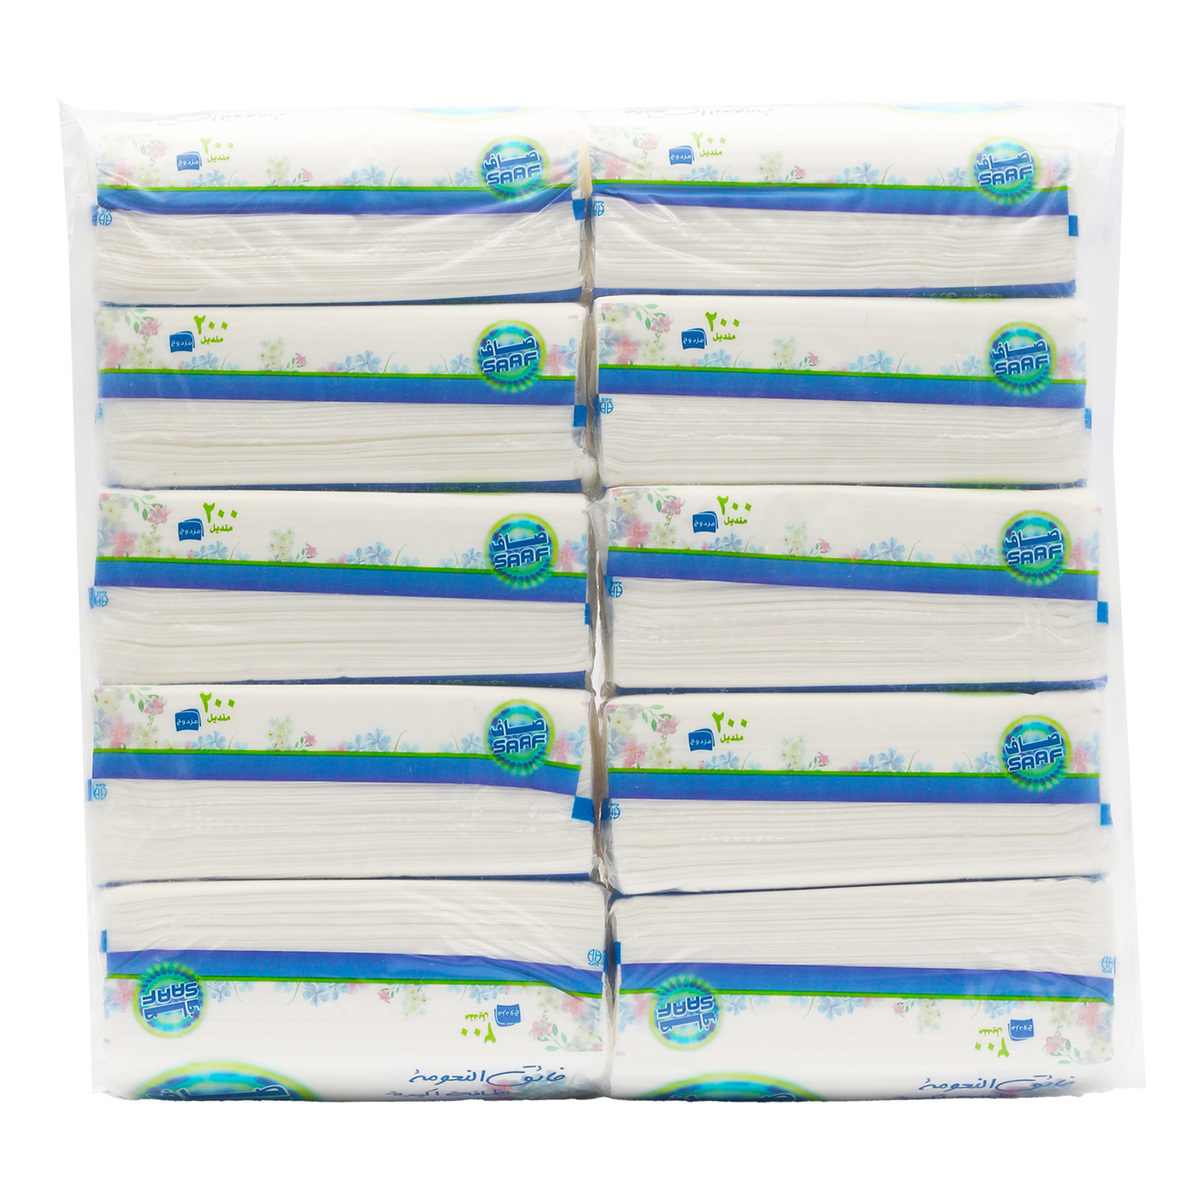 Saaf Soft Facial Tissue 2 ply Value Pack 10 x 200 Sheets